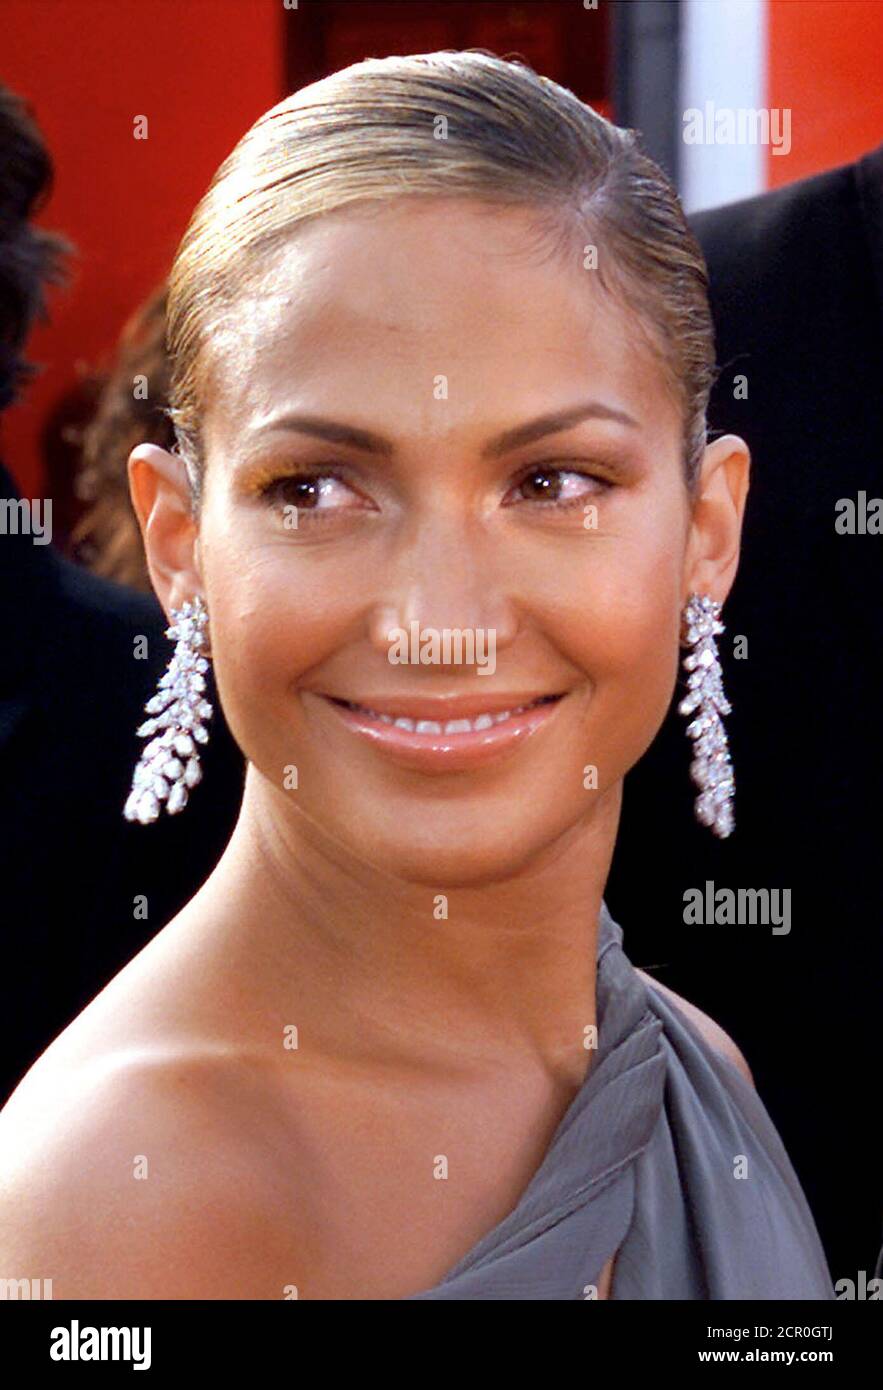 Actress Jennifer Lopez wears red fox fur false eye lashes as she arrives at  the Academy Awards in this file photo from March, 2001. Celebrity makeup  artist Valerie Sarnelle's newest Oscar accessory